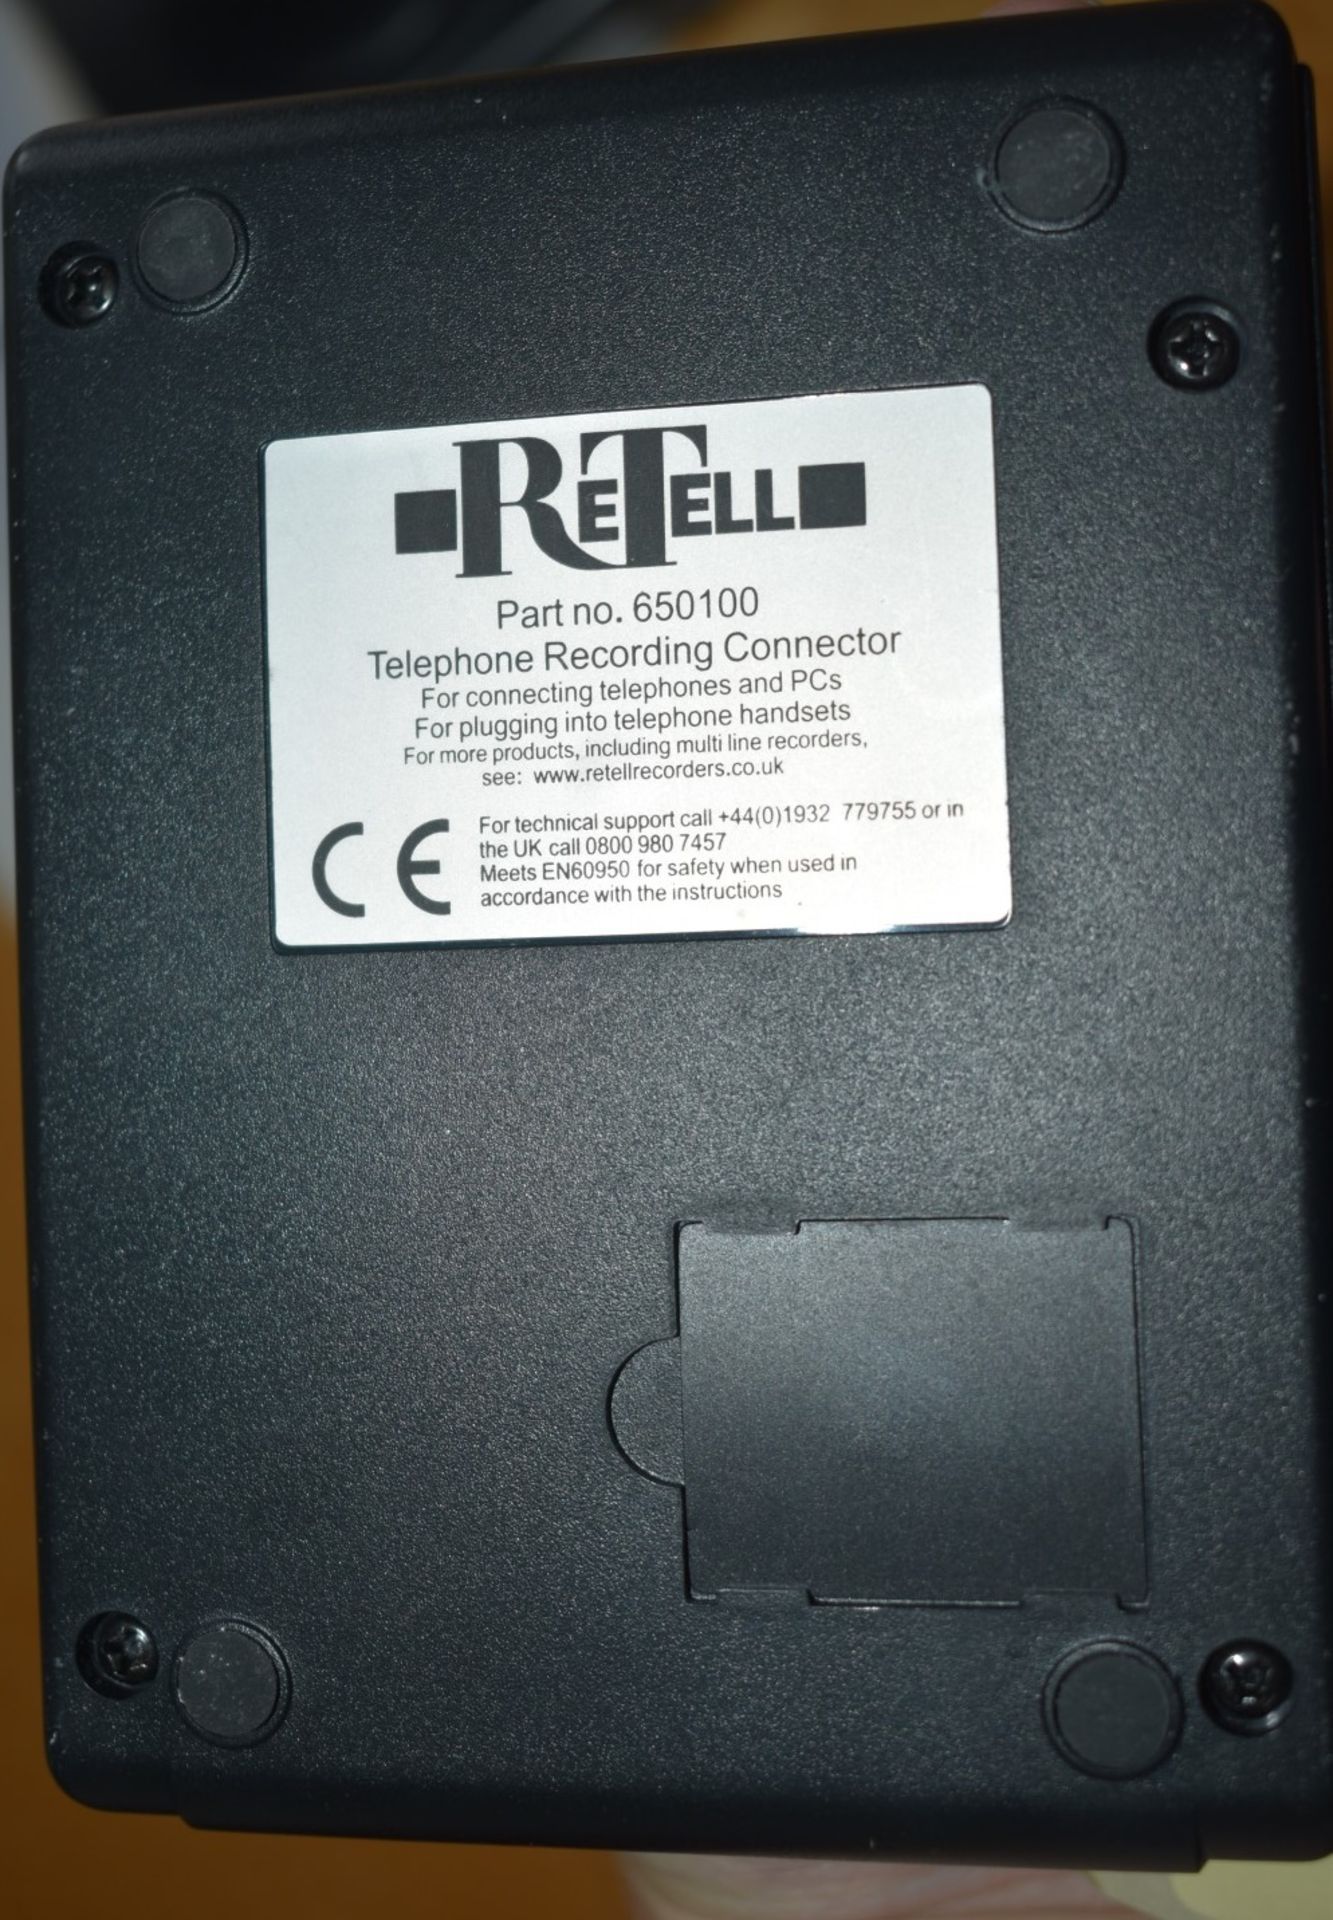 1 x ReTell Telephone Recording Units With Manuals - Model Numbers Include 650100 and 701149 - Ref - Image 2 of 3